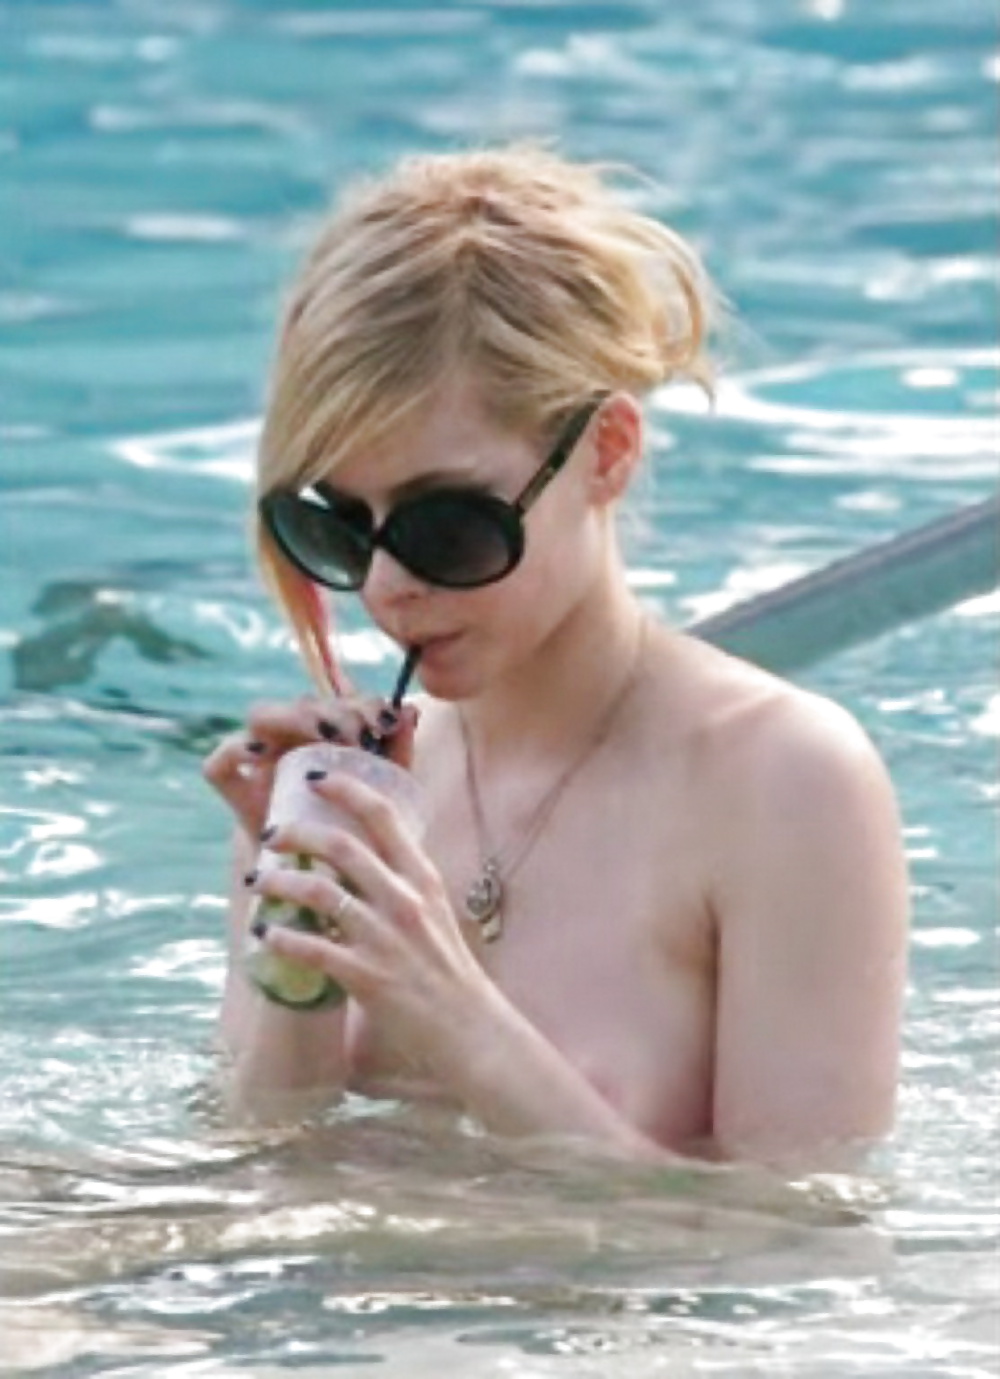 Avril Lavigne Nude in pool with her friend